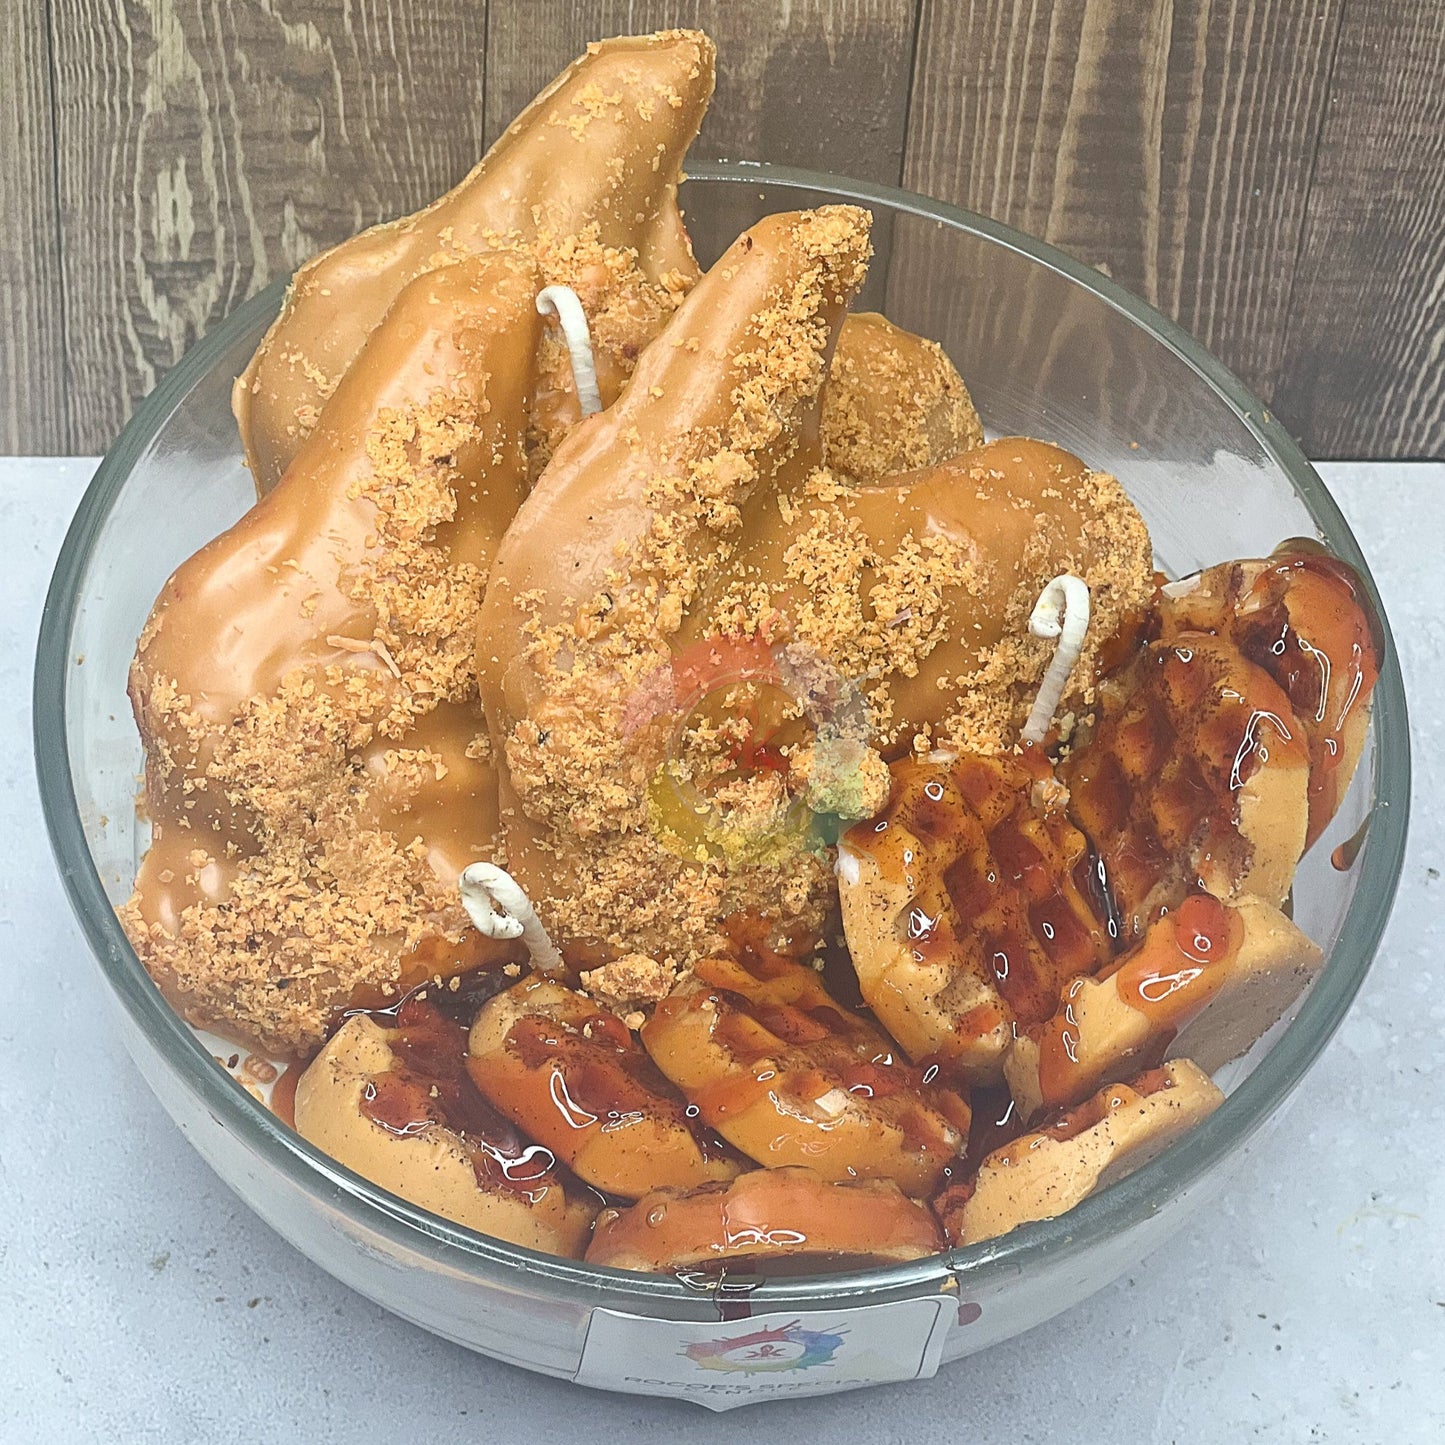 Photo of glass candle. candle mimic fired chicken and waffles with maple syru